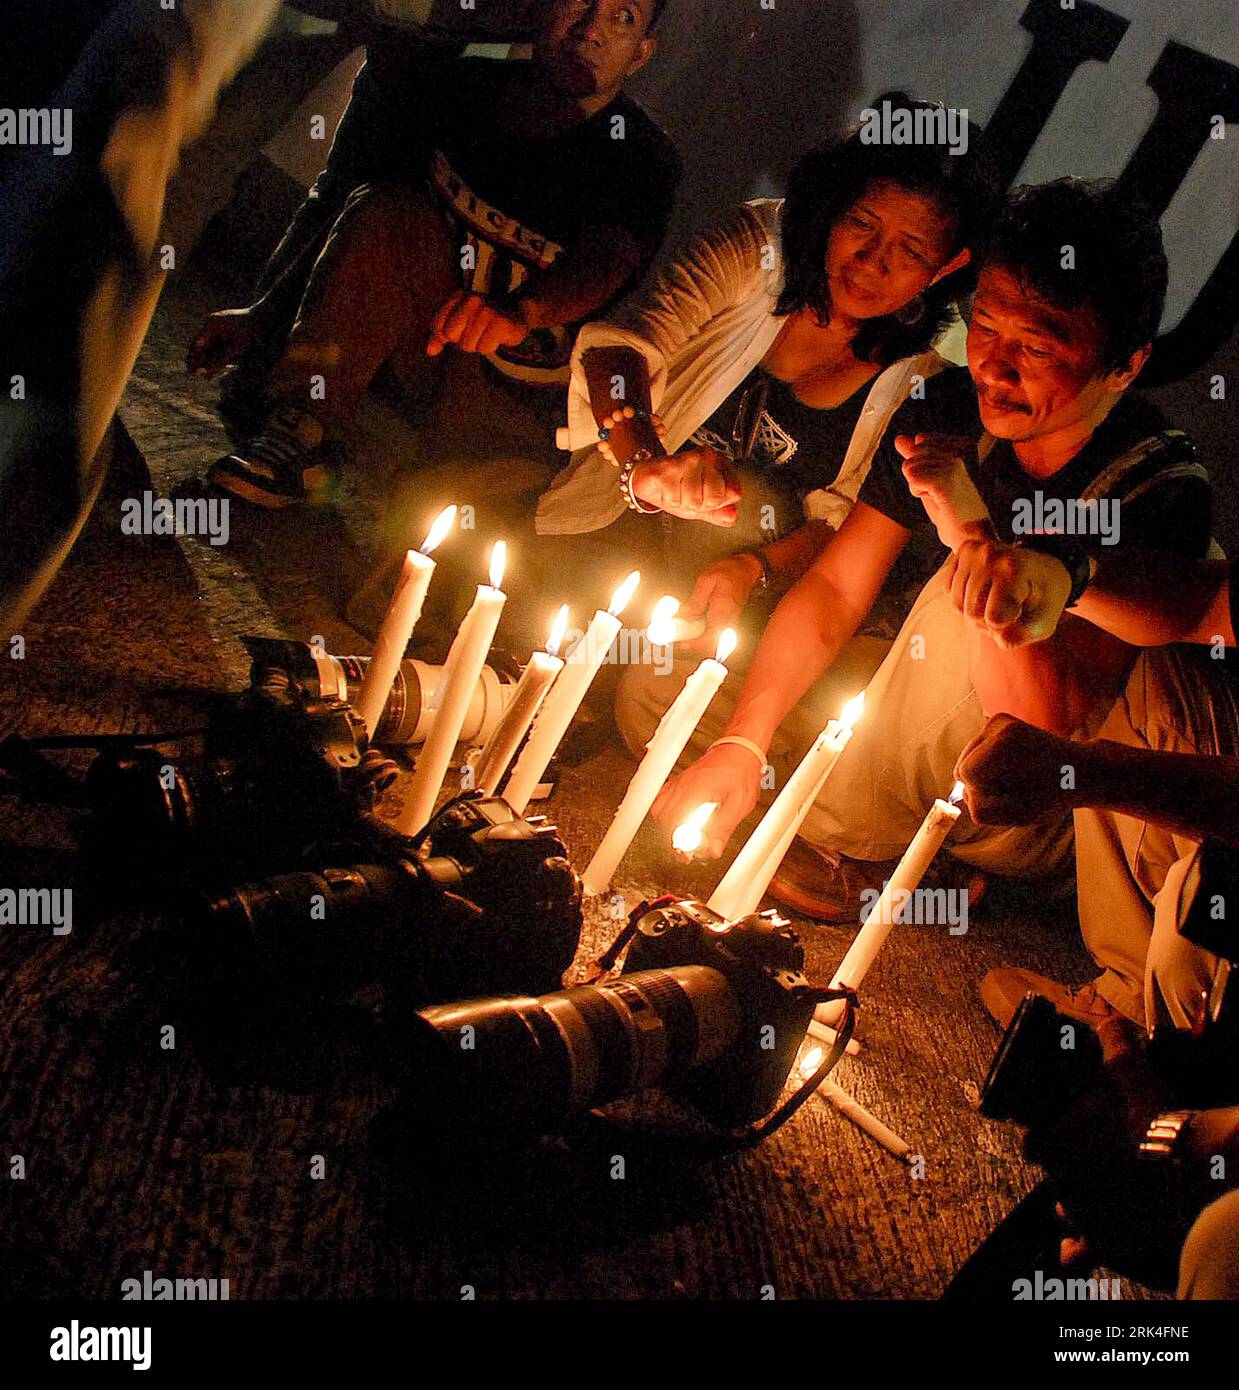 Bildnummer: 53626478  Datum: 24.11.2009  Copyright: imago/Xinhua (091125) -- MANILA, Nov. 25, 2009 (Xinhua) -- Journalists hold a candlelight indignation rally after a stunning massacre of journalists, civilians and relatives of politicians happened in Maguindanao of the southern Philippines, in Manila, Nov. 24, 2009. The death toll in the stunning massacre of journalists, civilians and relatives of politicians three days ago in the volatile southern Philippines stood at more than 50, police said on Wednesday. (Xinhua/Jonas Sulit) (zx) (1)THE PHILIPPINES-MASSACRE-JOURNALISTS-RALLY PUBLICATIONx Stock Photo